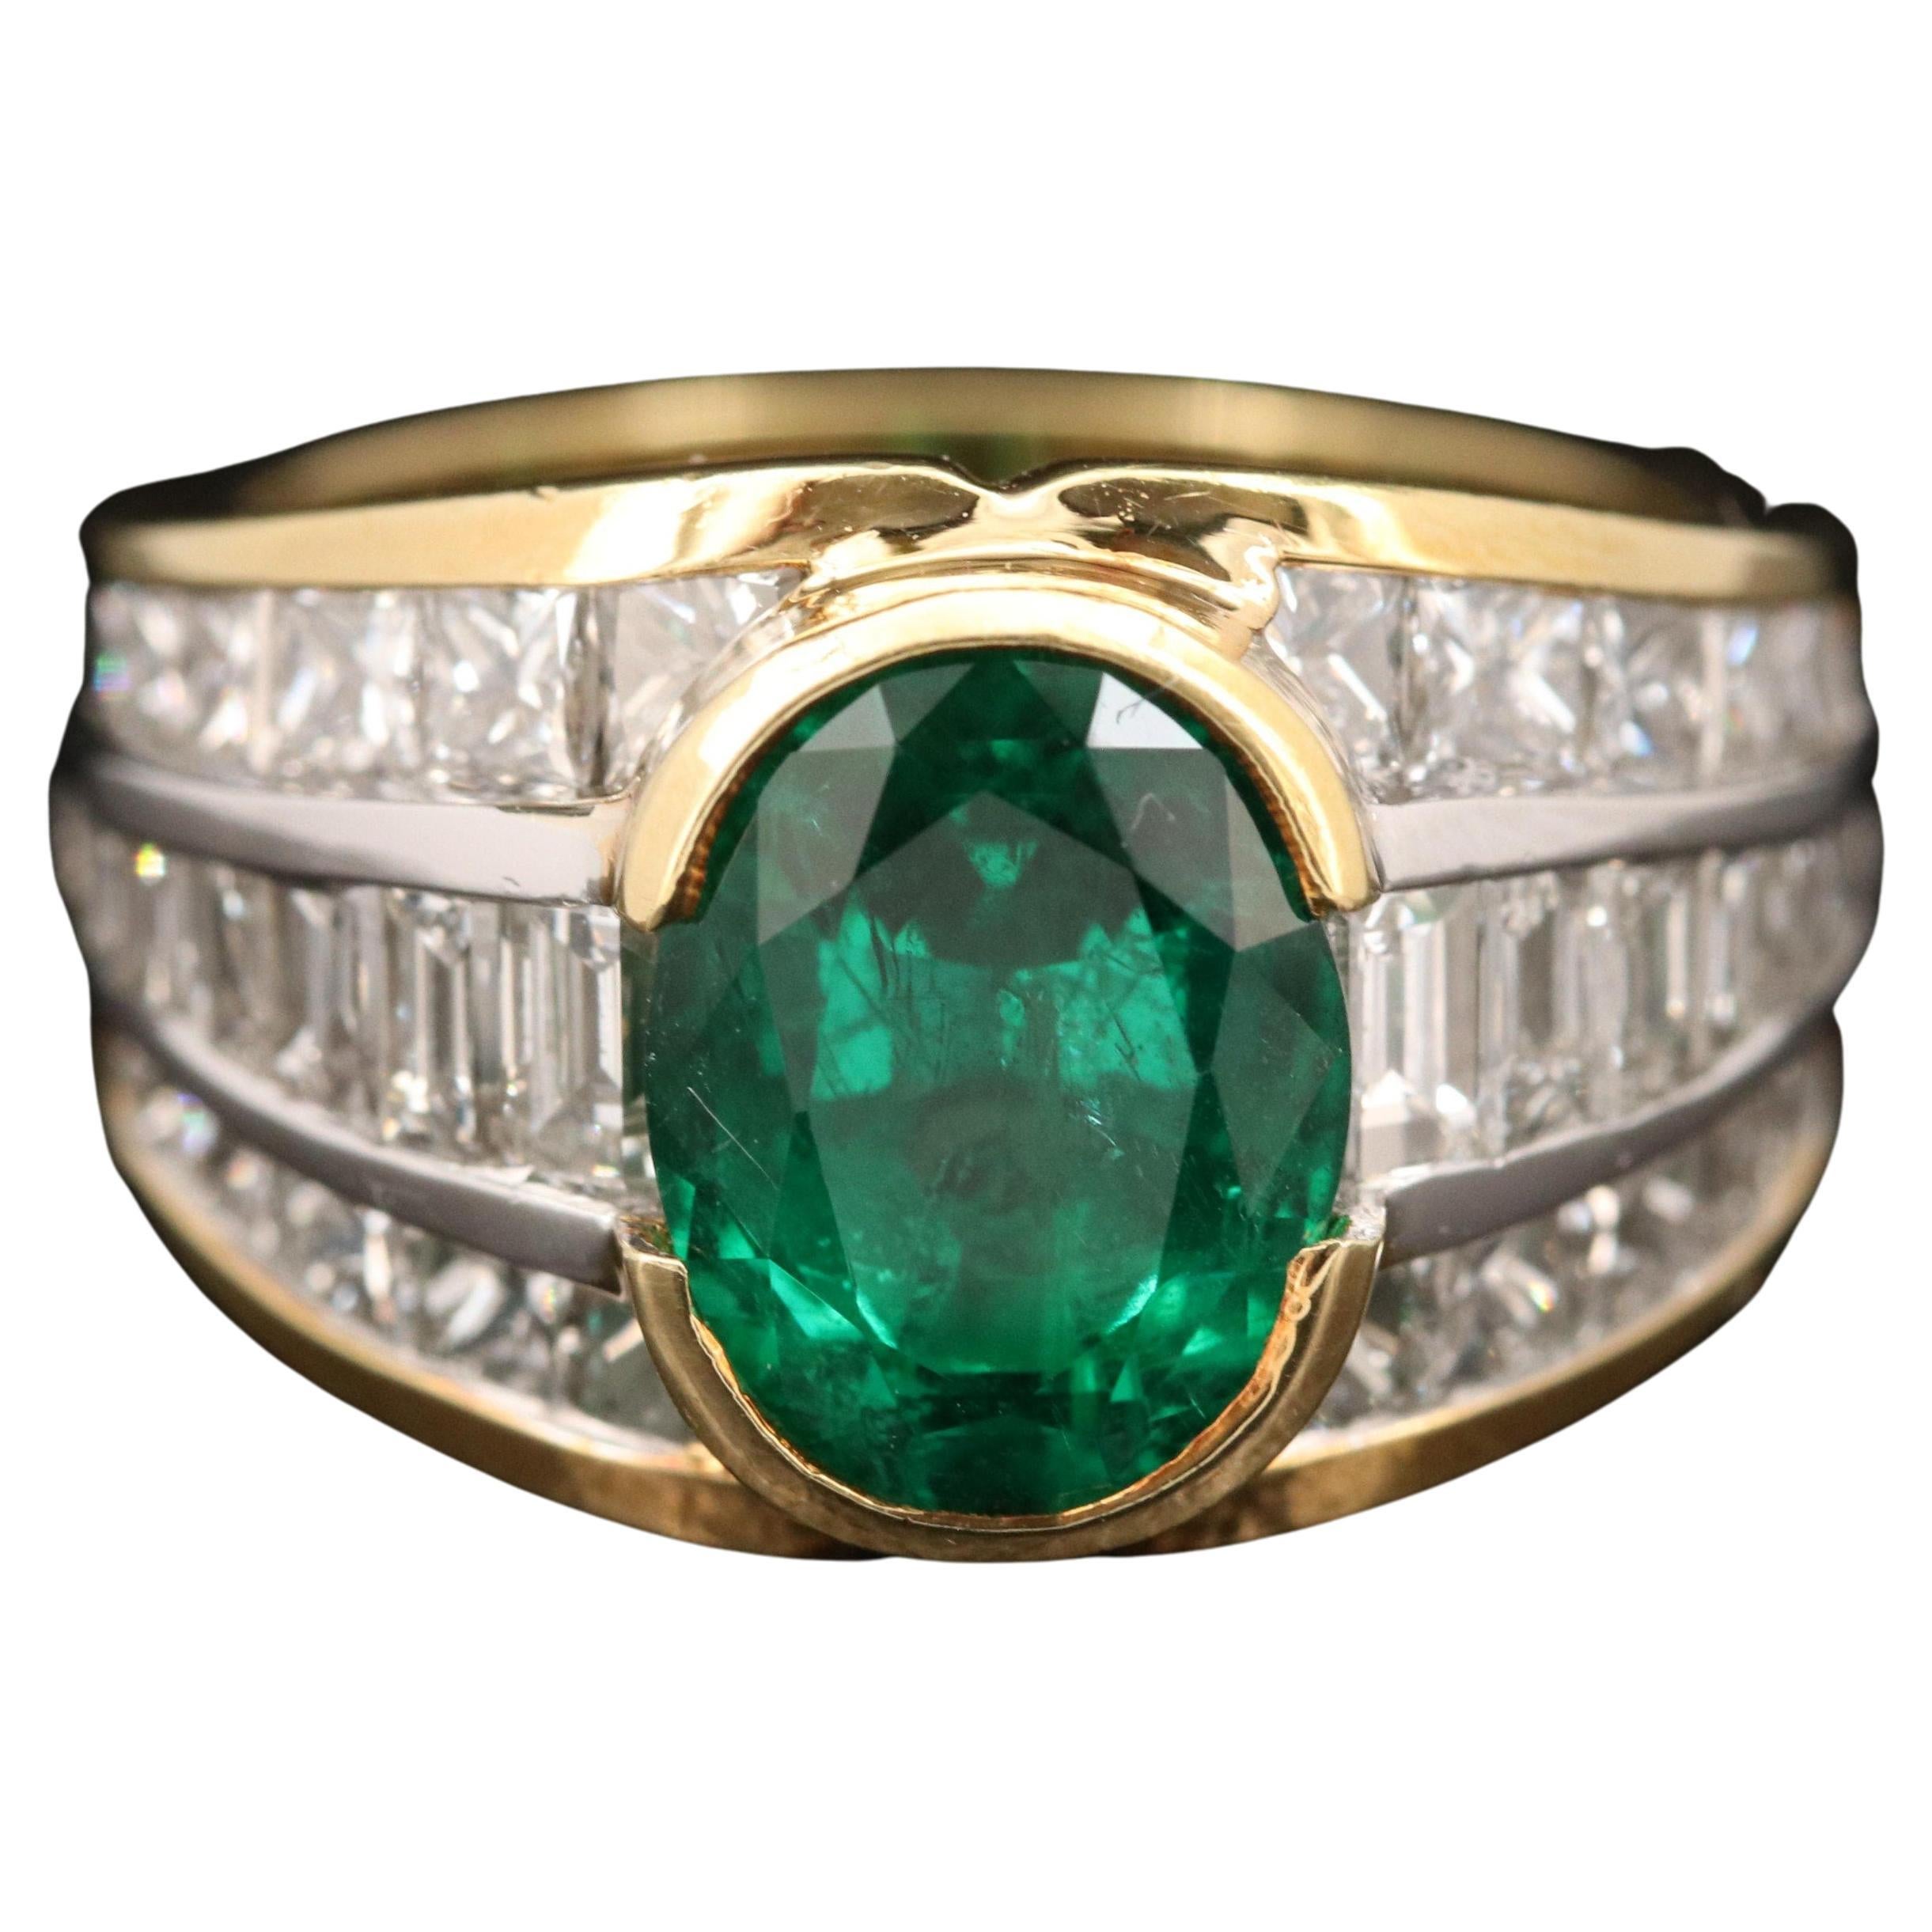 For Sale:  2.5 Carat Oval Cut Emerald Engagement Ring, Natural Emerald Diamond Wedding Band